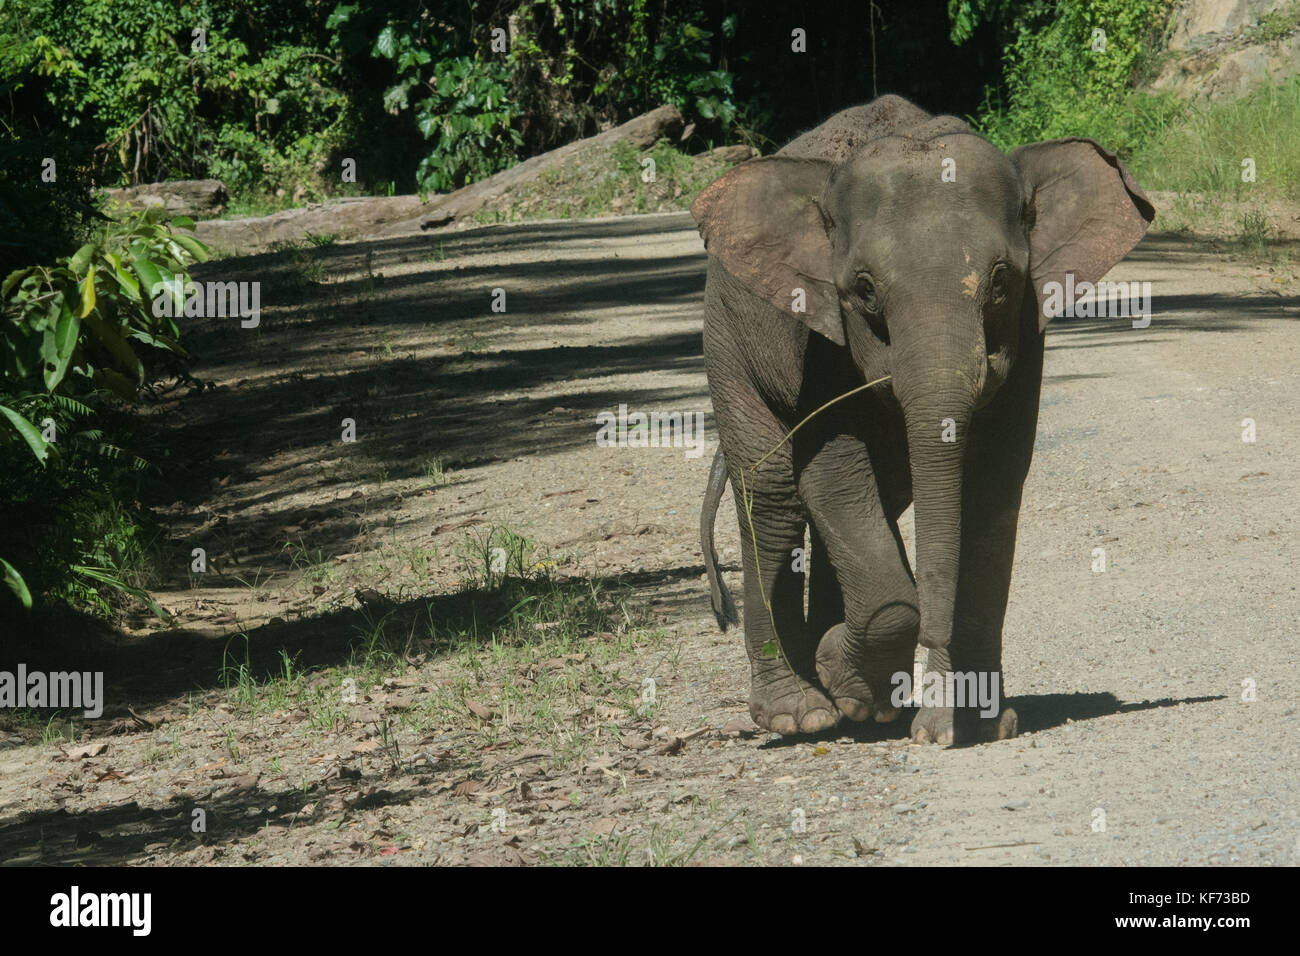 A young Bornean pygmy elephant, endemic to Borneo, runs on a road passing through the forest. Stock Photo